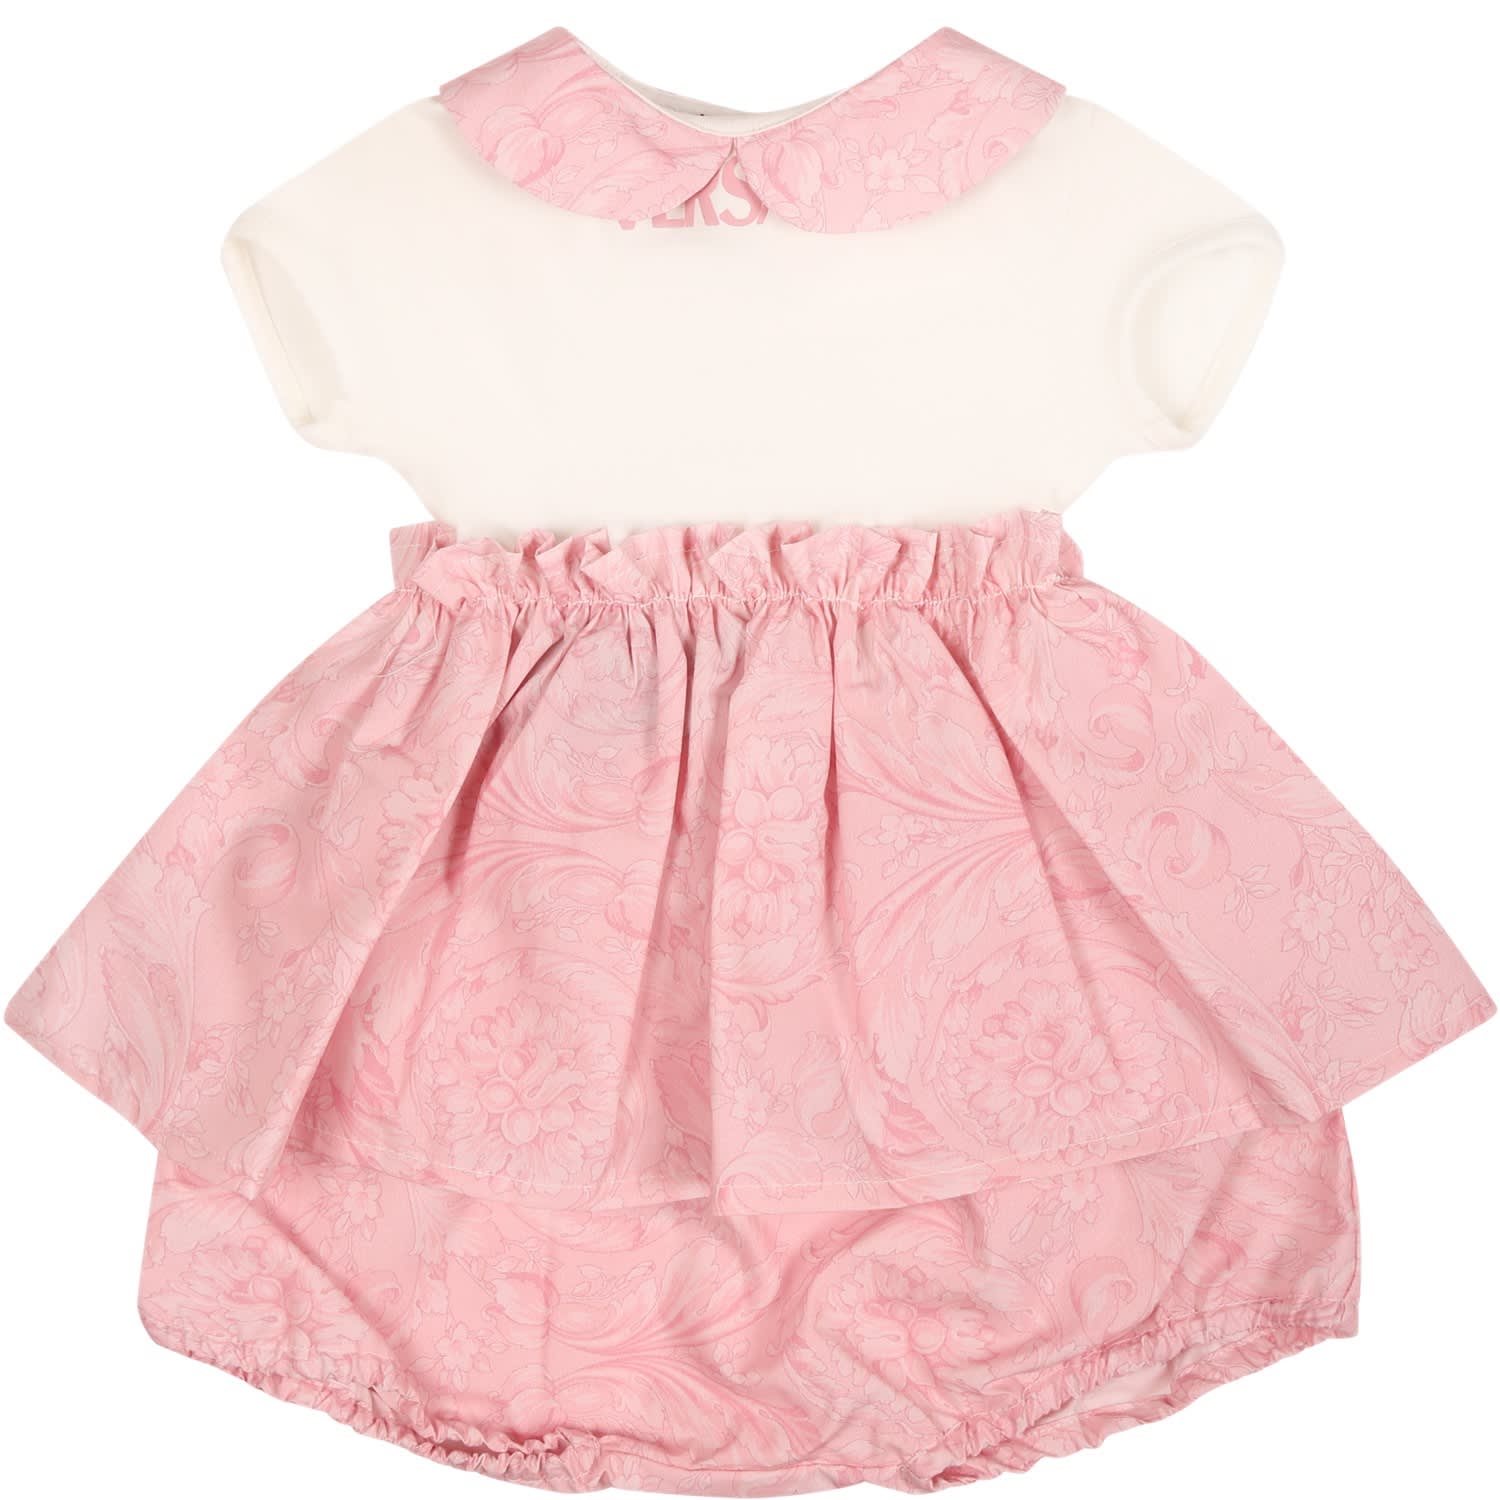 Versace Pink Dress For Baby Girl With Baroque Print